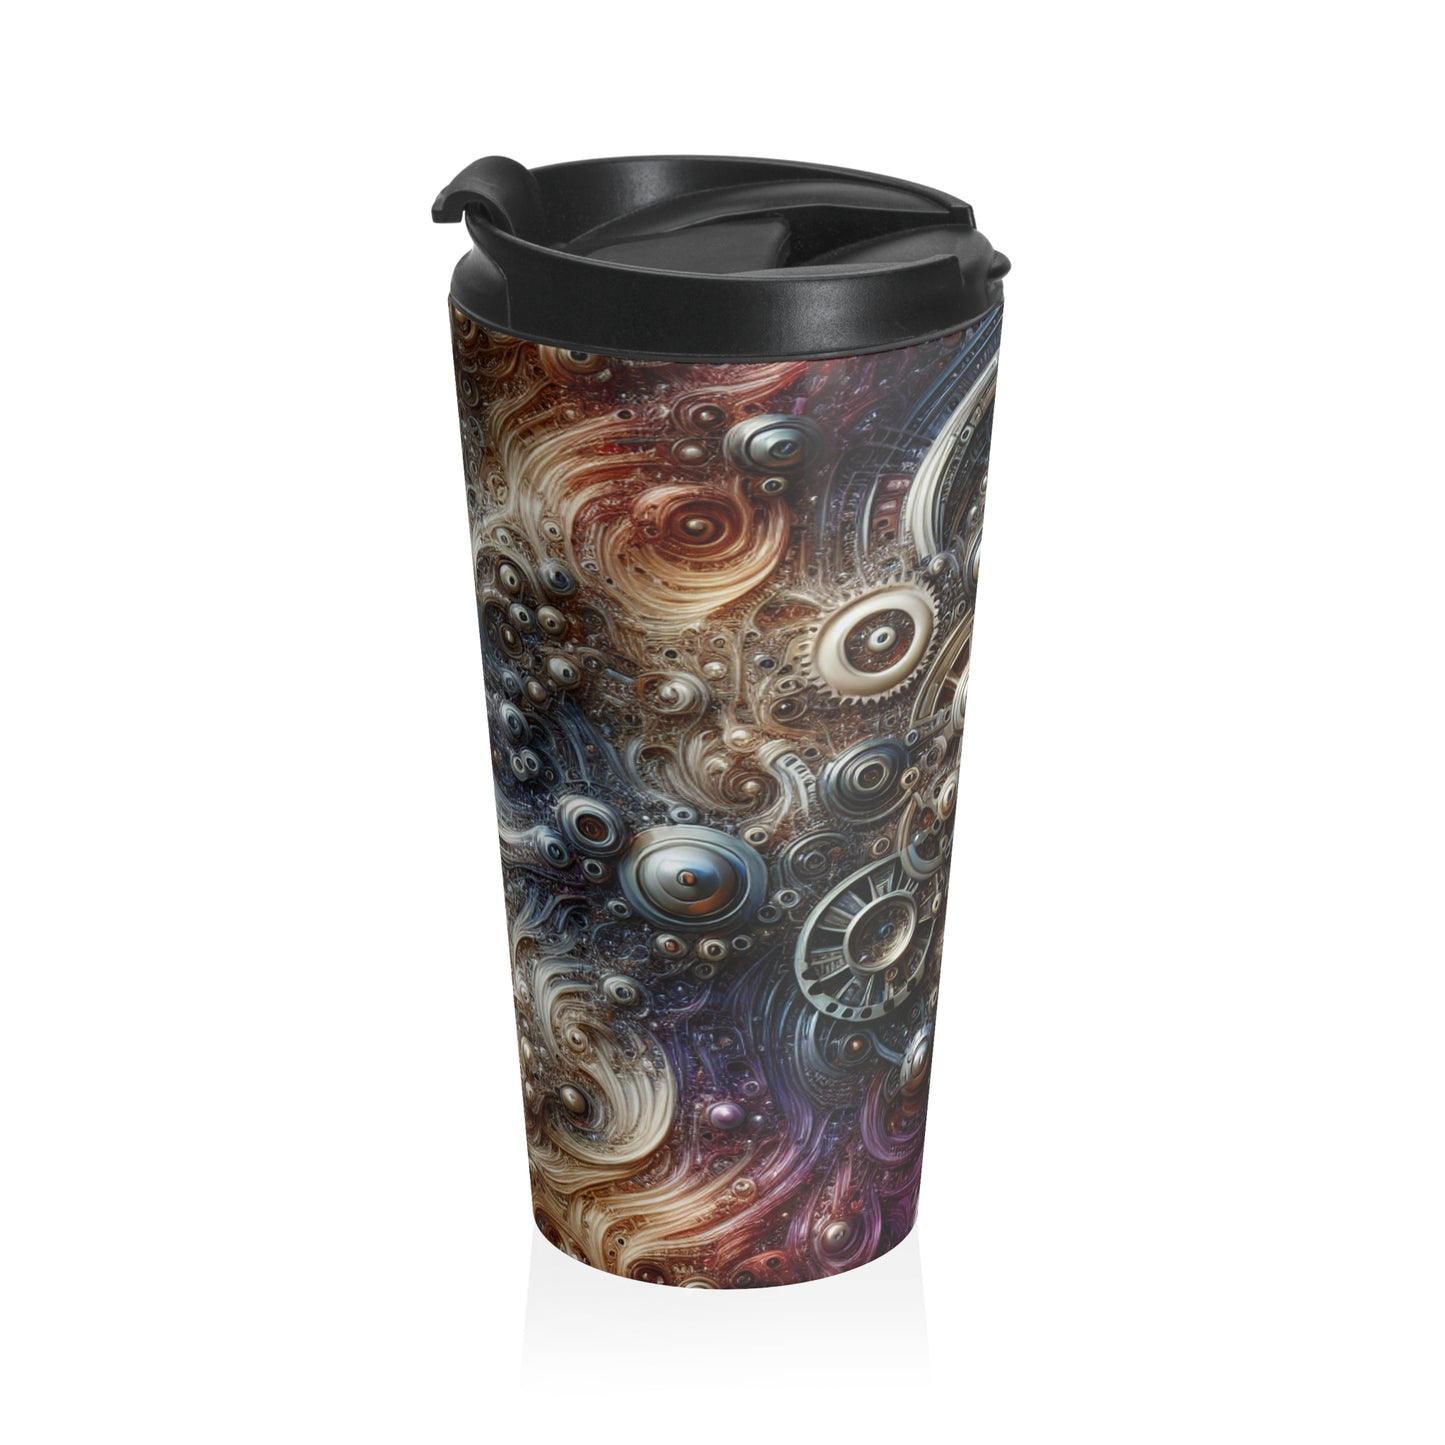 "Cybernetic Sentinel: A Futuristic Fusion of Man and Machine" - The Alien Stainless Steel Travel Mug Bio-mechanical Art